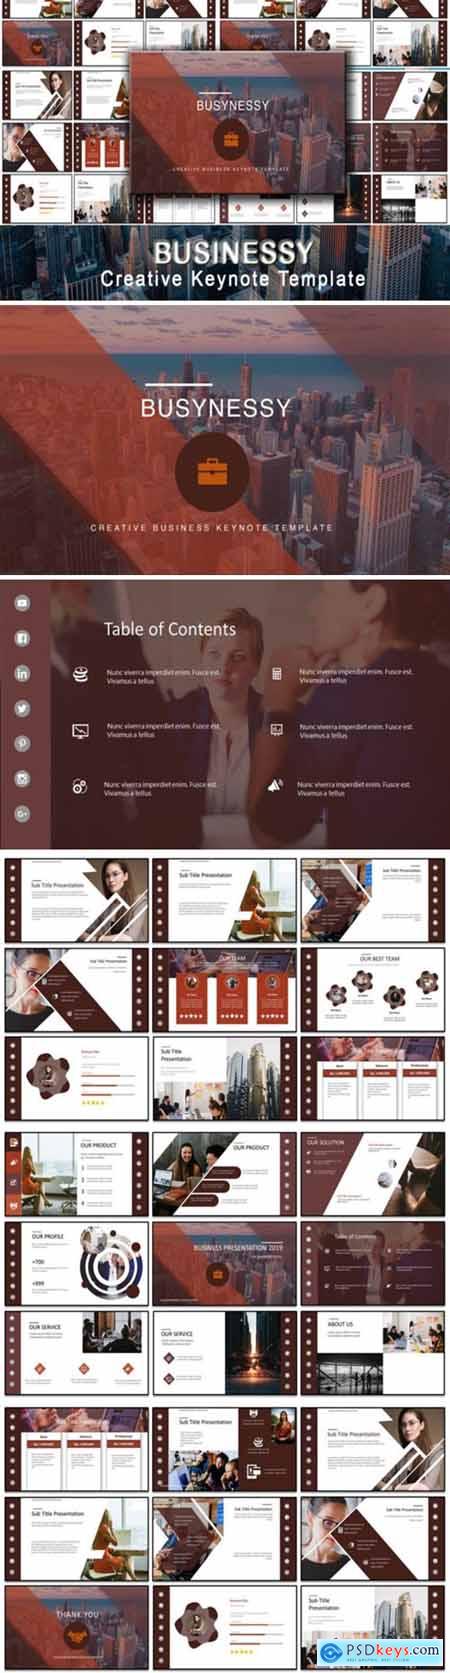 Businessy - Business Keynote Template 2013658